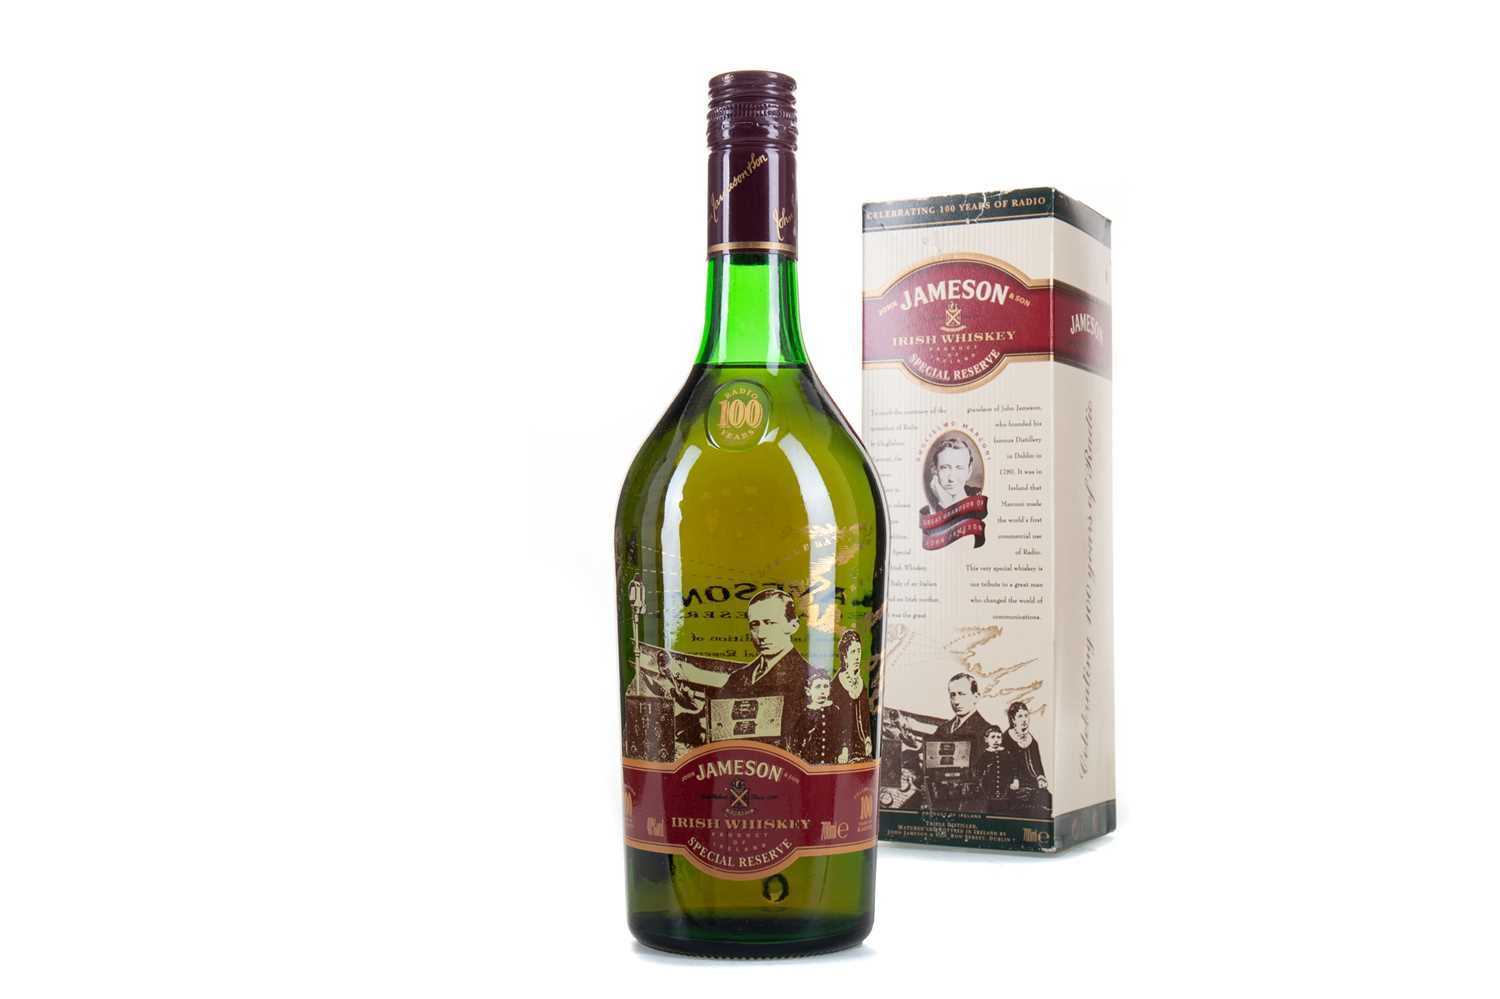 Lot 153 - JAMESON SPECIAL RESERVE CELEBRATING 100 YEARS OF RADIO